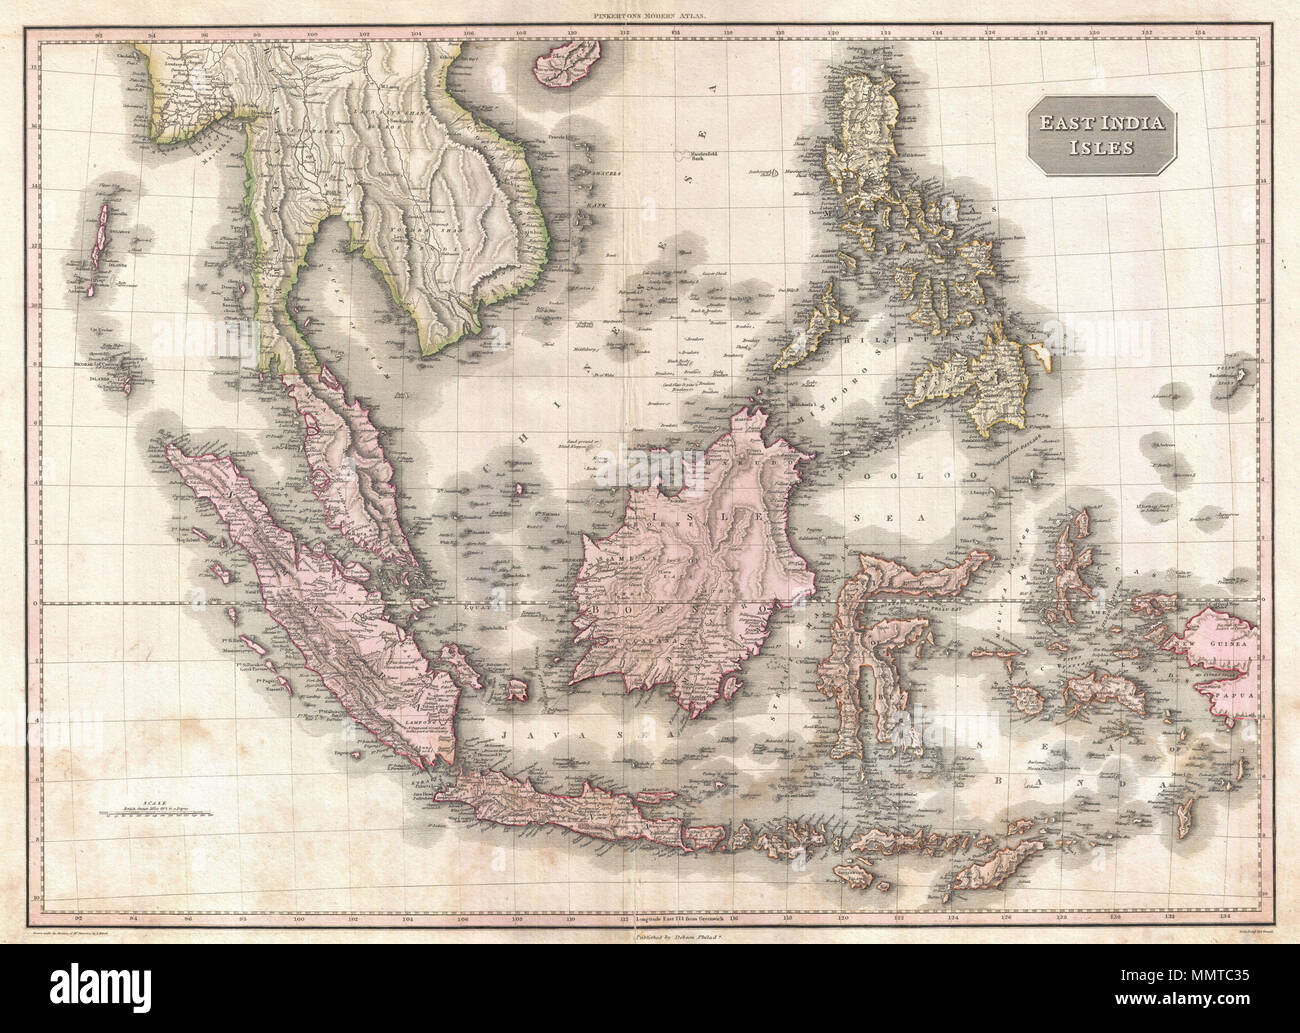 .  English: Truly a masterwork of copperplate engraving, this is Pinkerton's extraordinary 1818 map of the East Indies. Covers from Burma south to Java and from the Andaman Islands eastward as far as the Philippines and New Guinea. Includes the entire Malay Peninsula, much of Southeast Asia (Thailand, Cambodia, Vietnam), Sumatra, Java, Borneo and the Philippines. Pinkerton offers impressive detail throughout noting indigenous groups, forts, towns and cities, swamps, mountains, and river systems. Known regions such as Java and Sumatra are full of interesting notes and commentary, such as the si Stock Photo